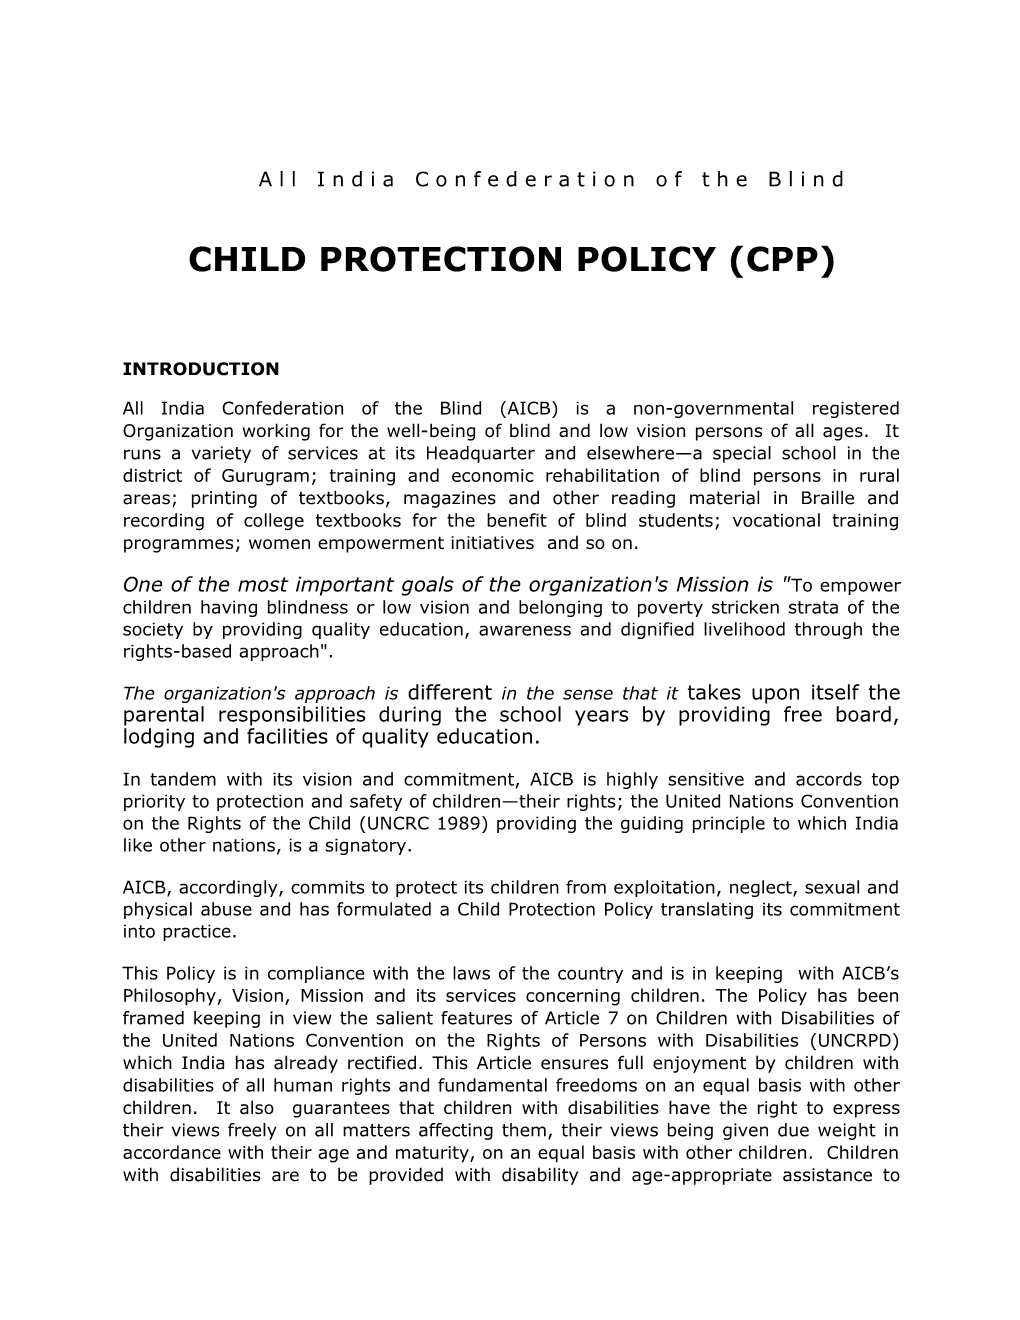 Child Protection Policy (Cpp)